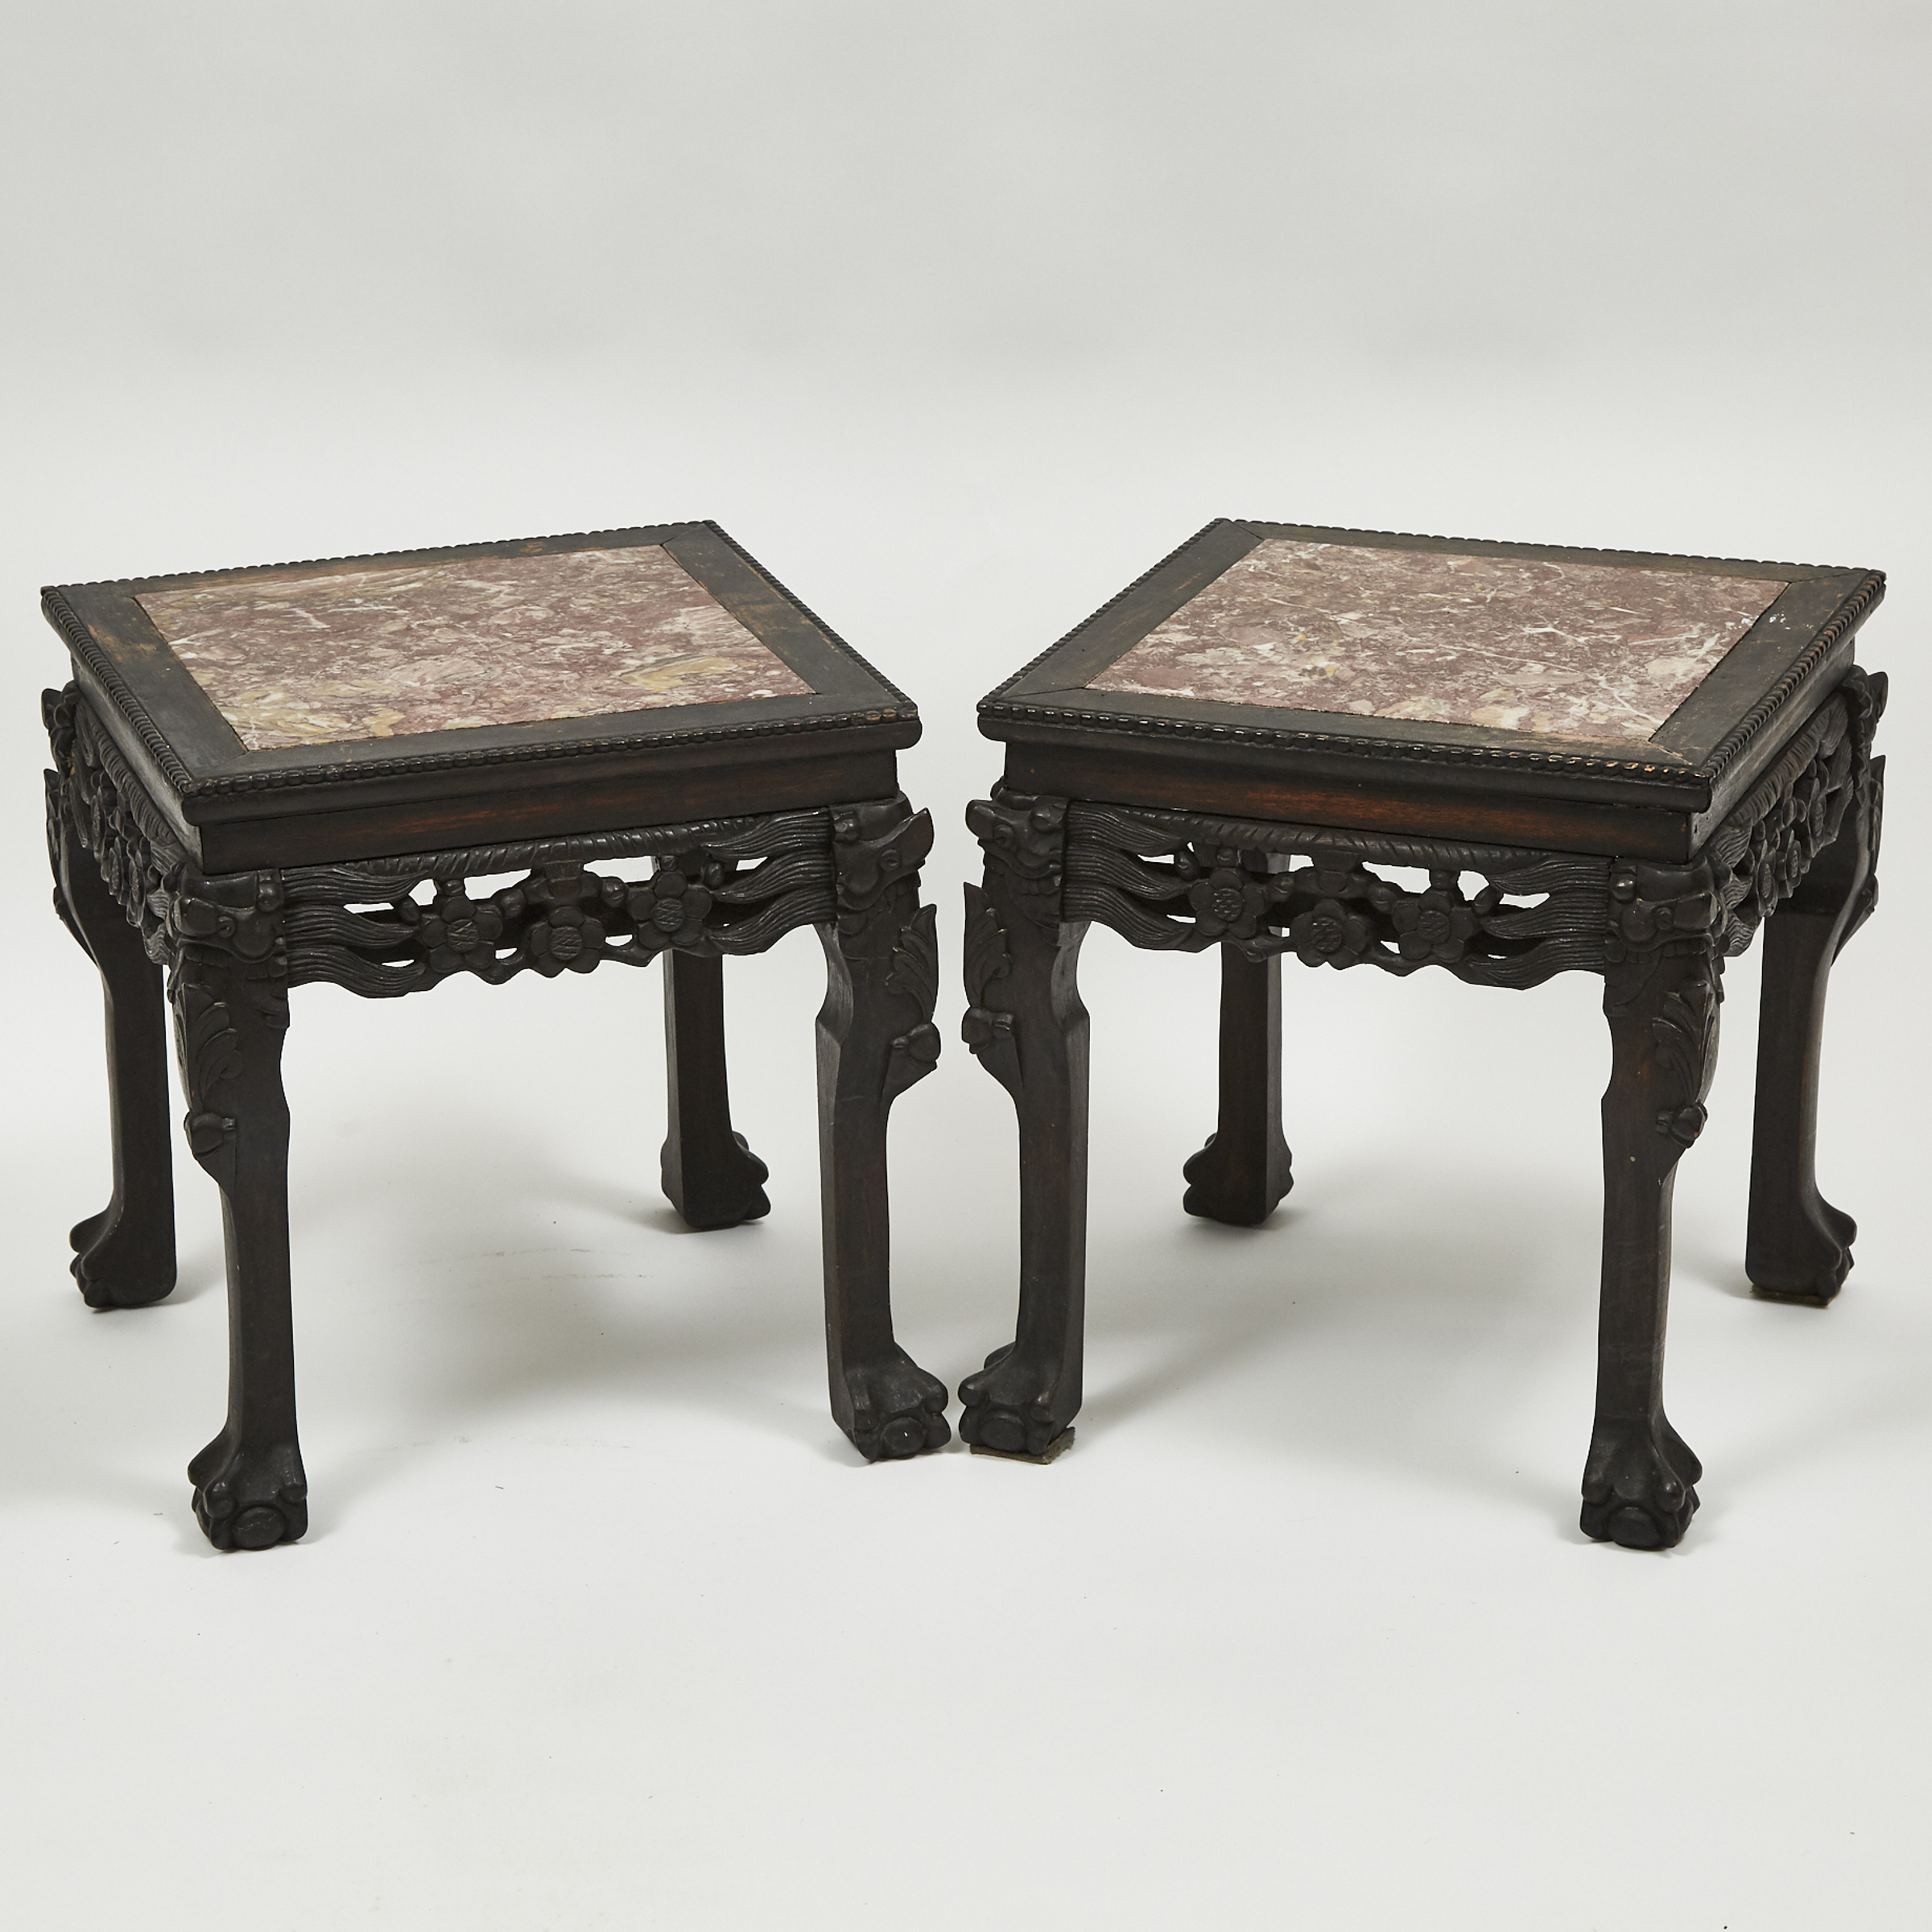 A Pair of Chinese Pink Marble Inset Square Stands